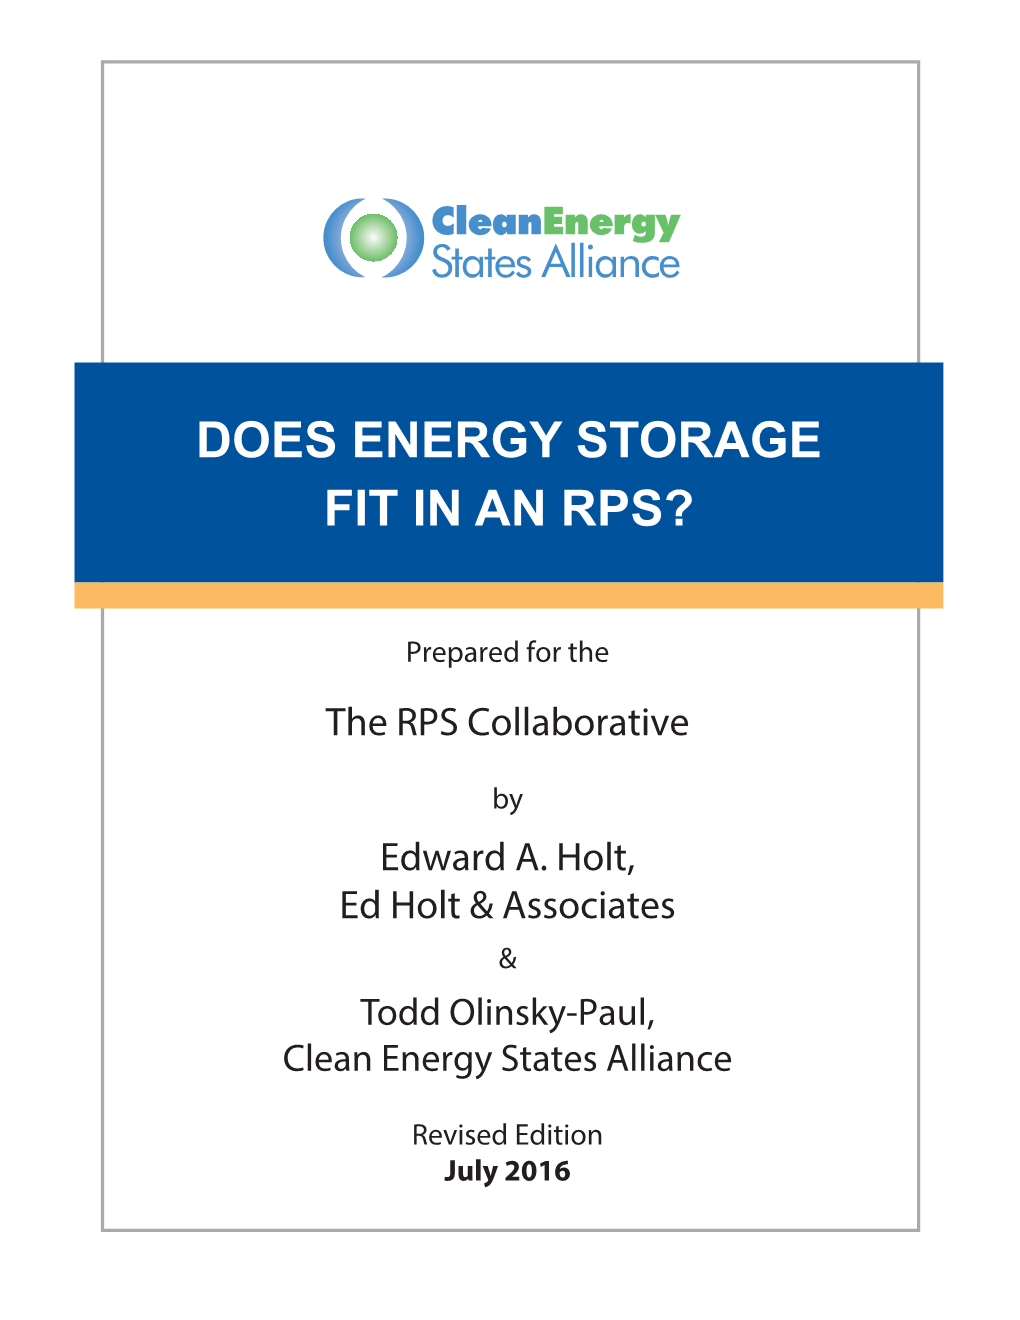 Does Energy Storage Fit in an Rps?